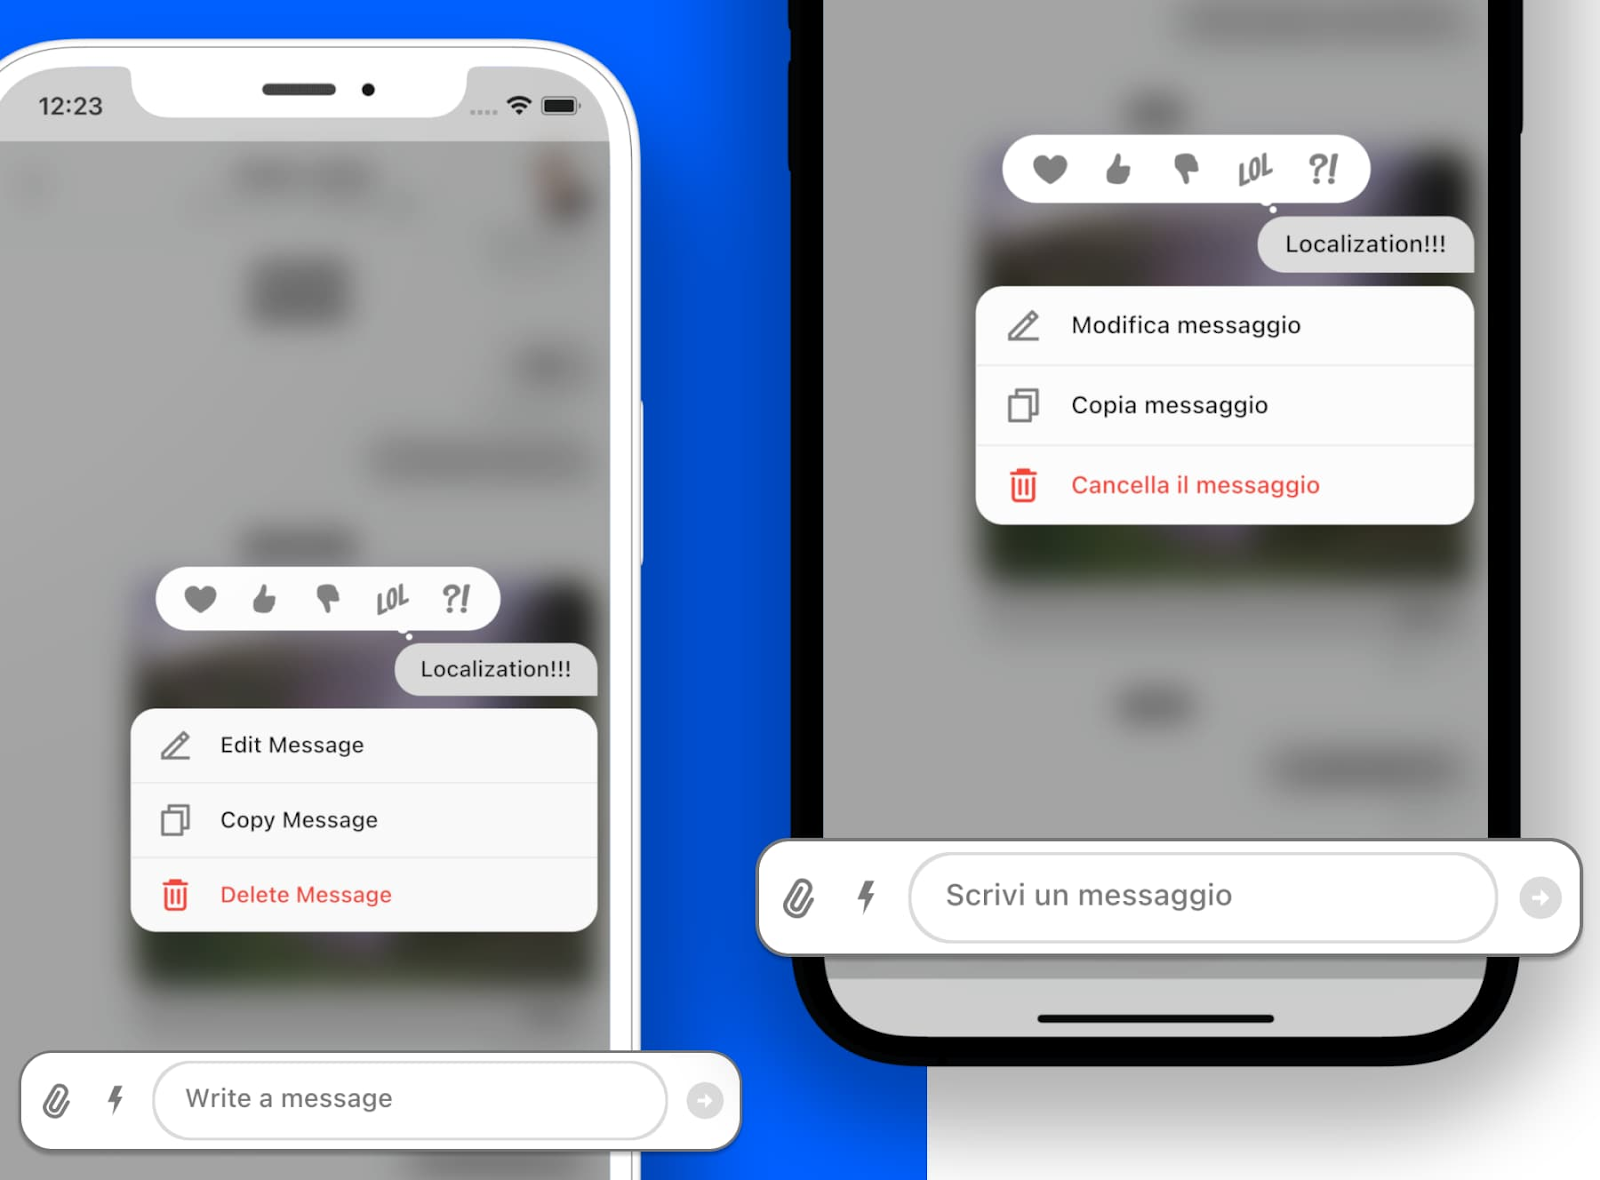 split screen showing in-app message translation from english to italian